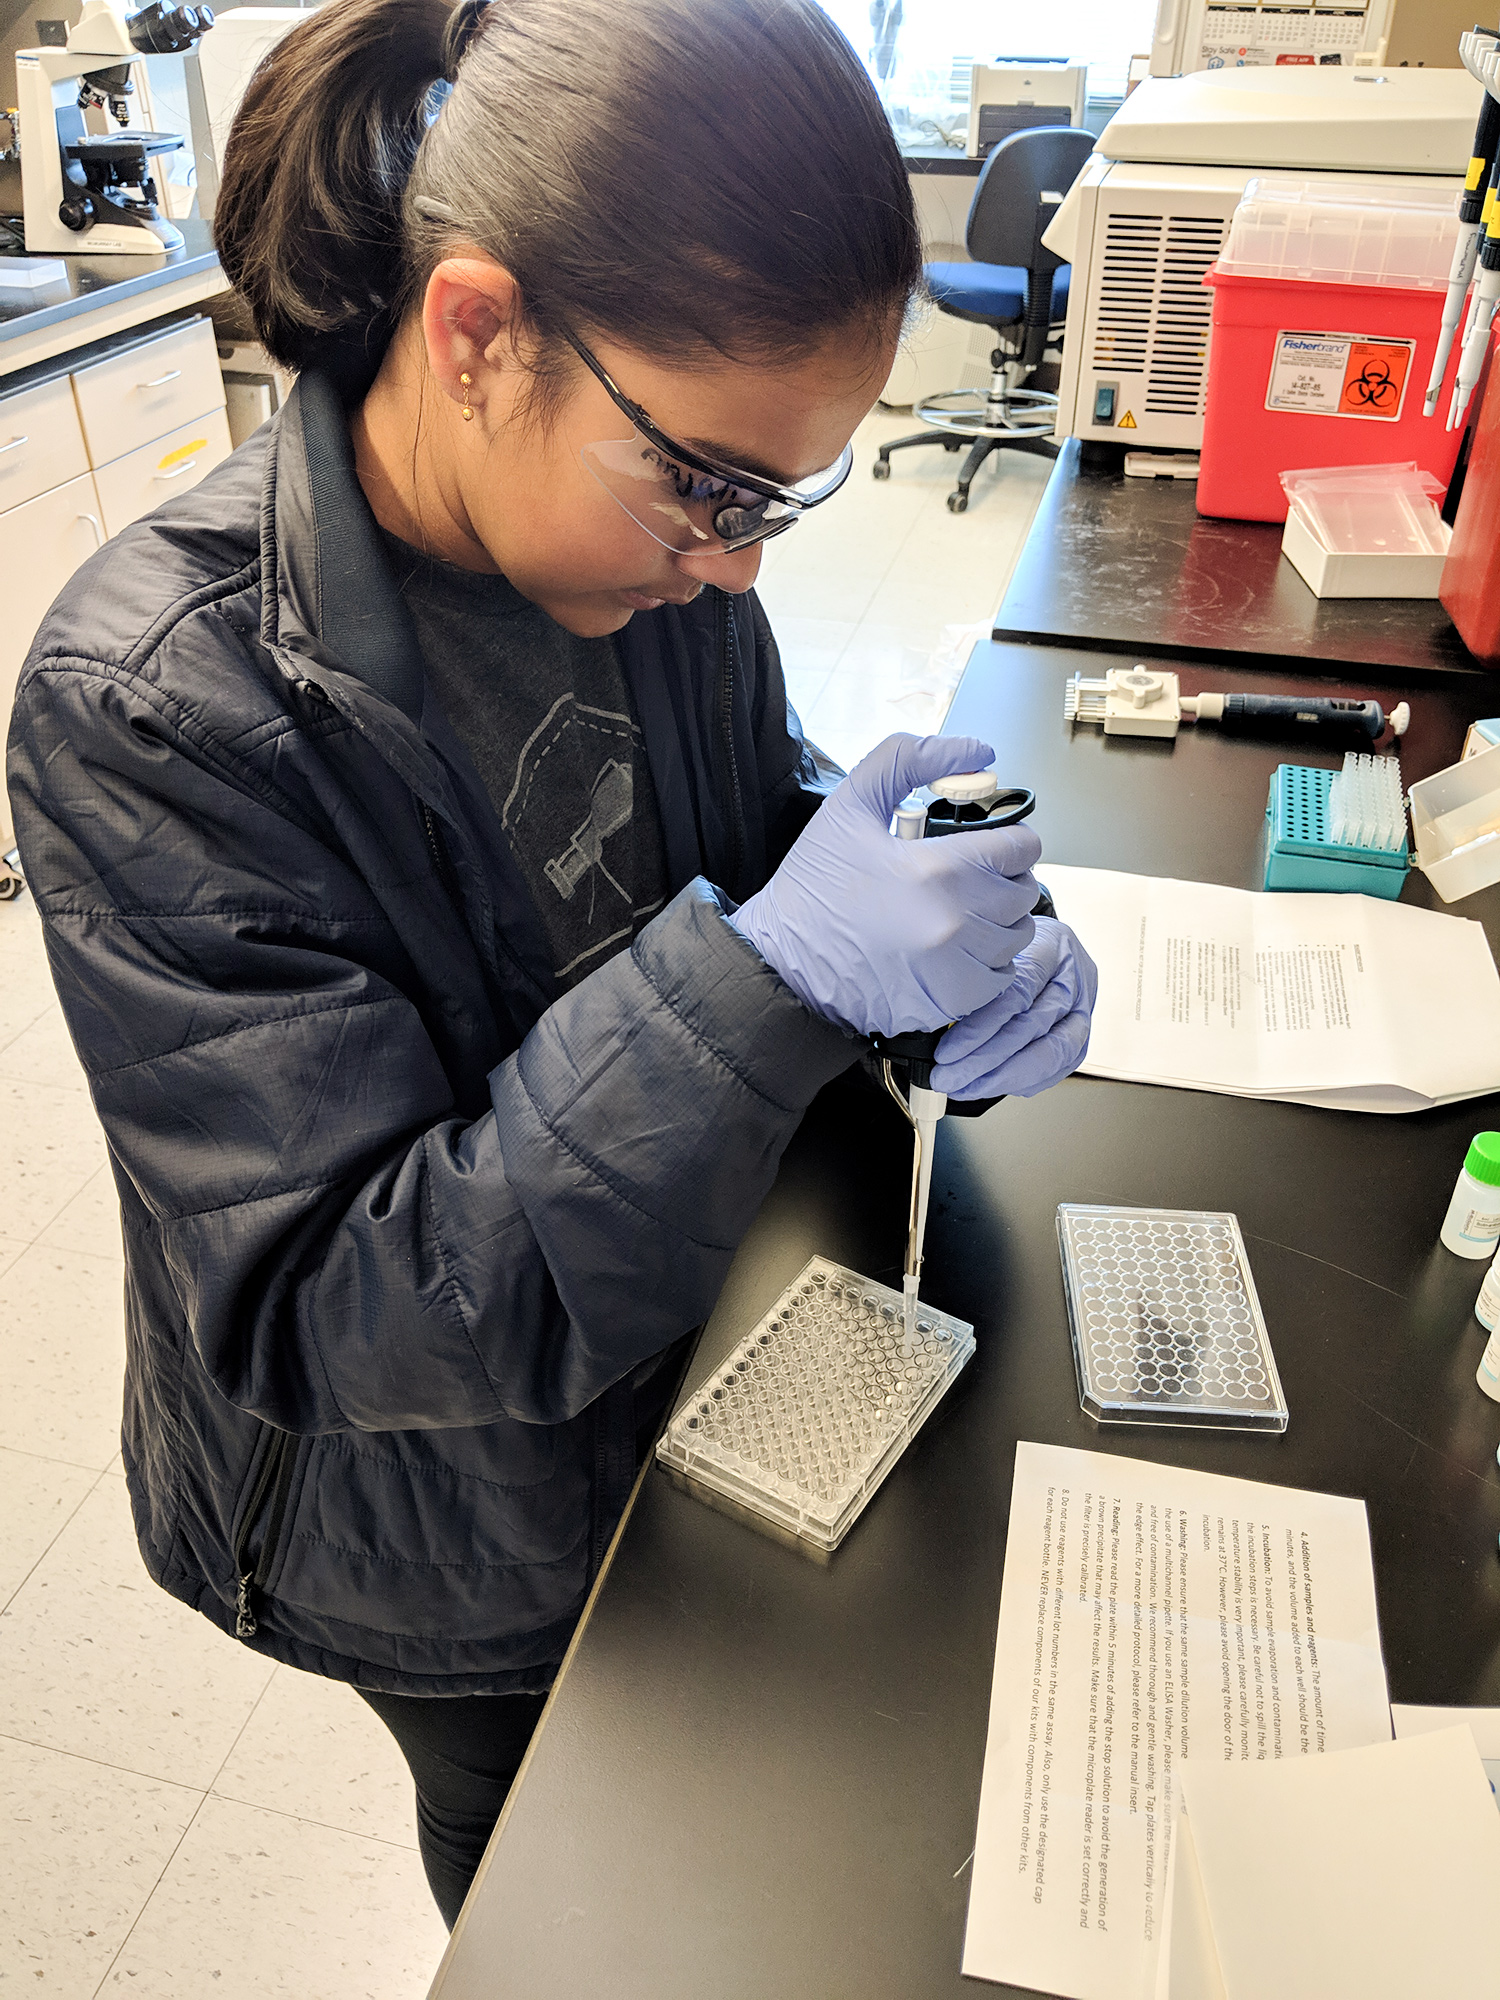 Gitanjali Rao pipetting while working in Dr. McMurray’s lab